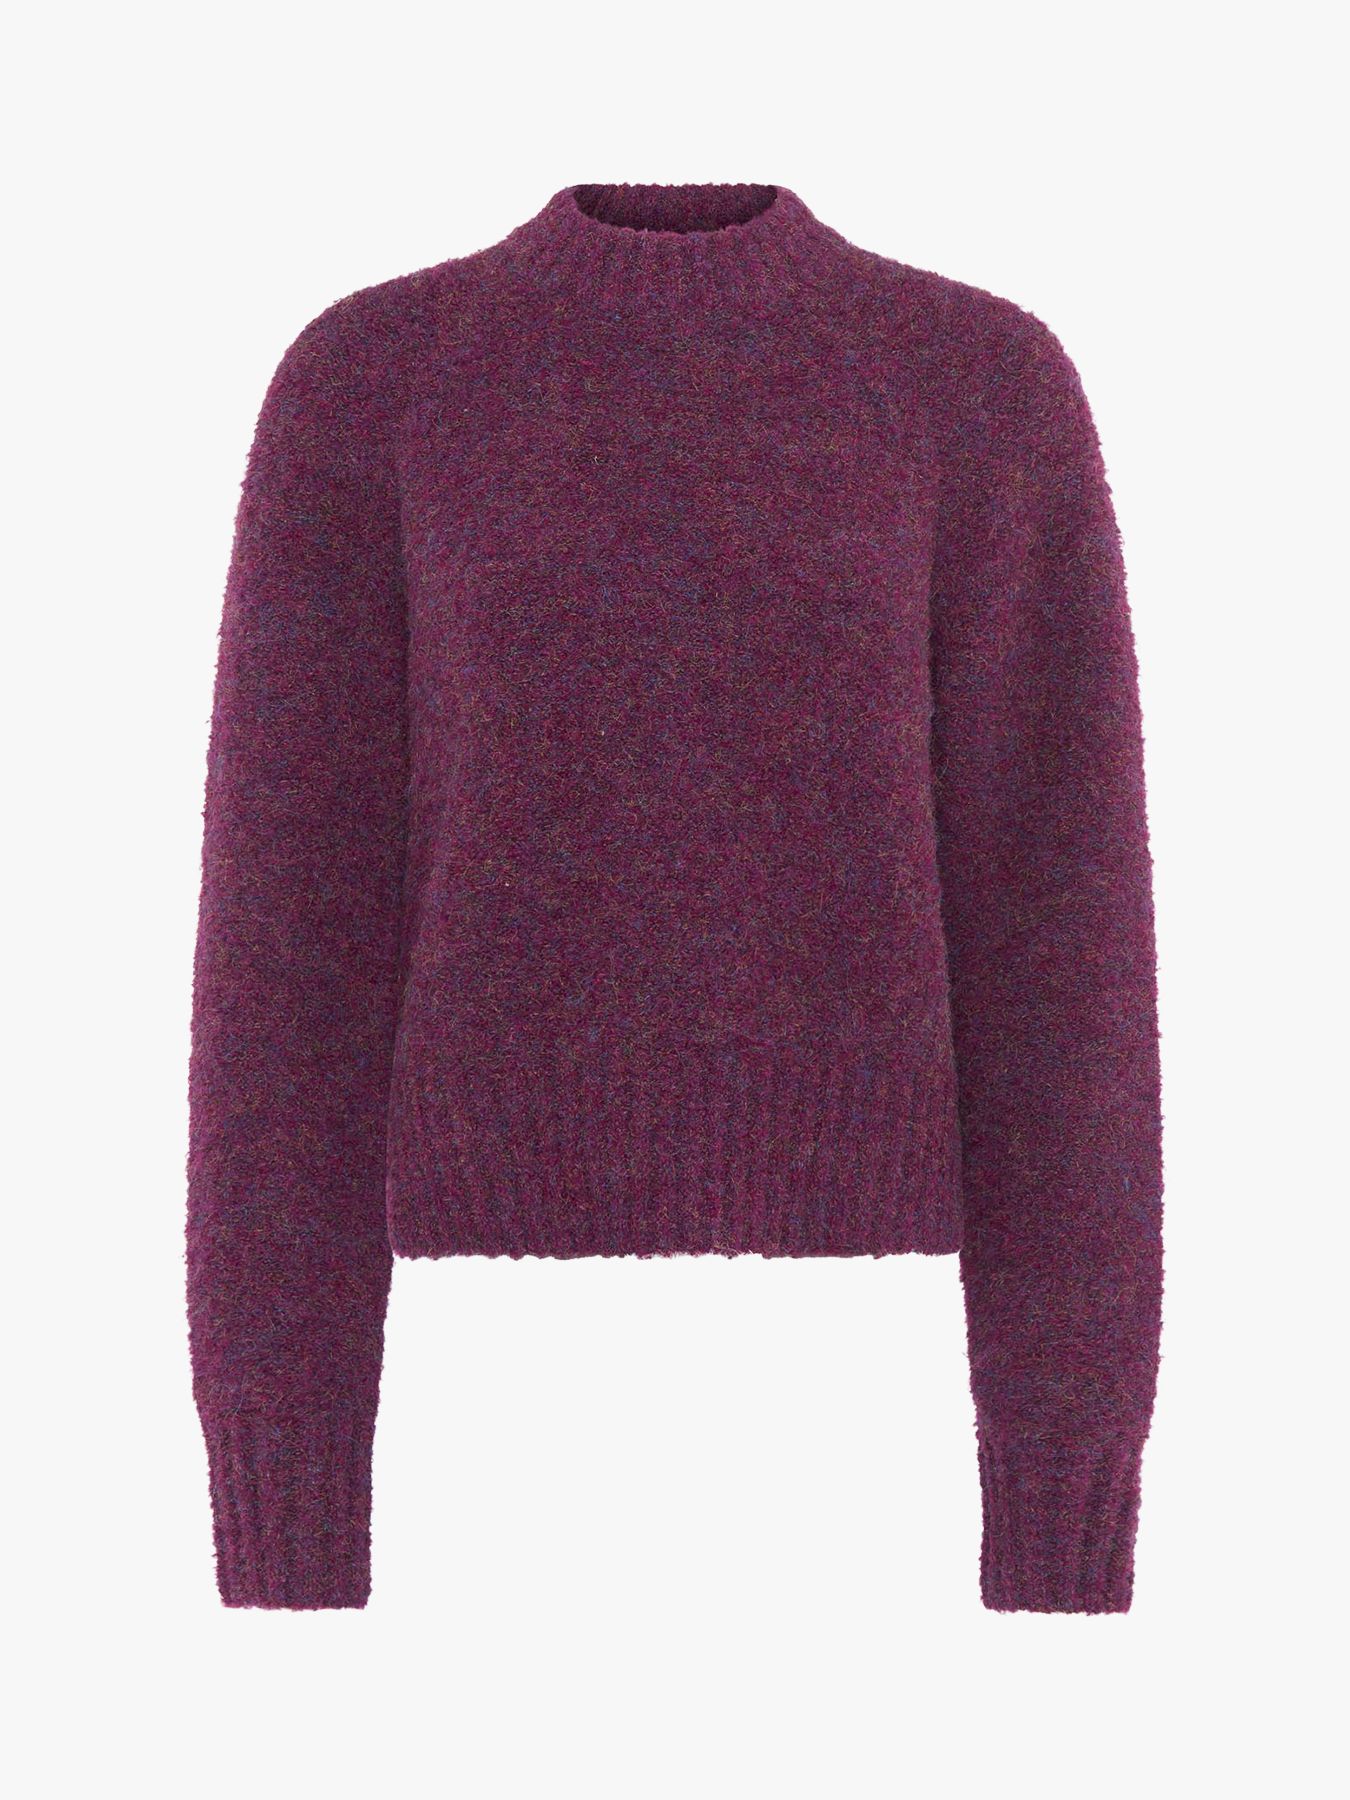 French Connection Krista Knit Jumper, Tyrian Purple